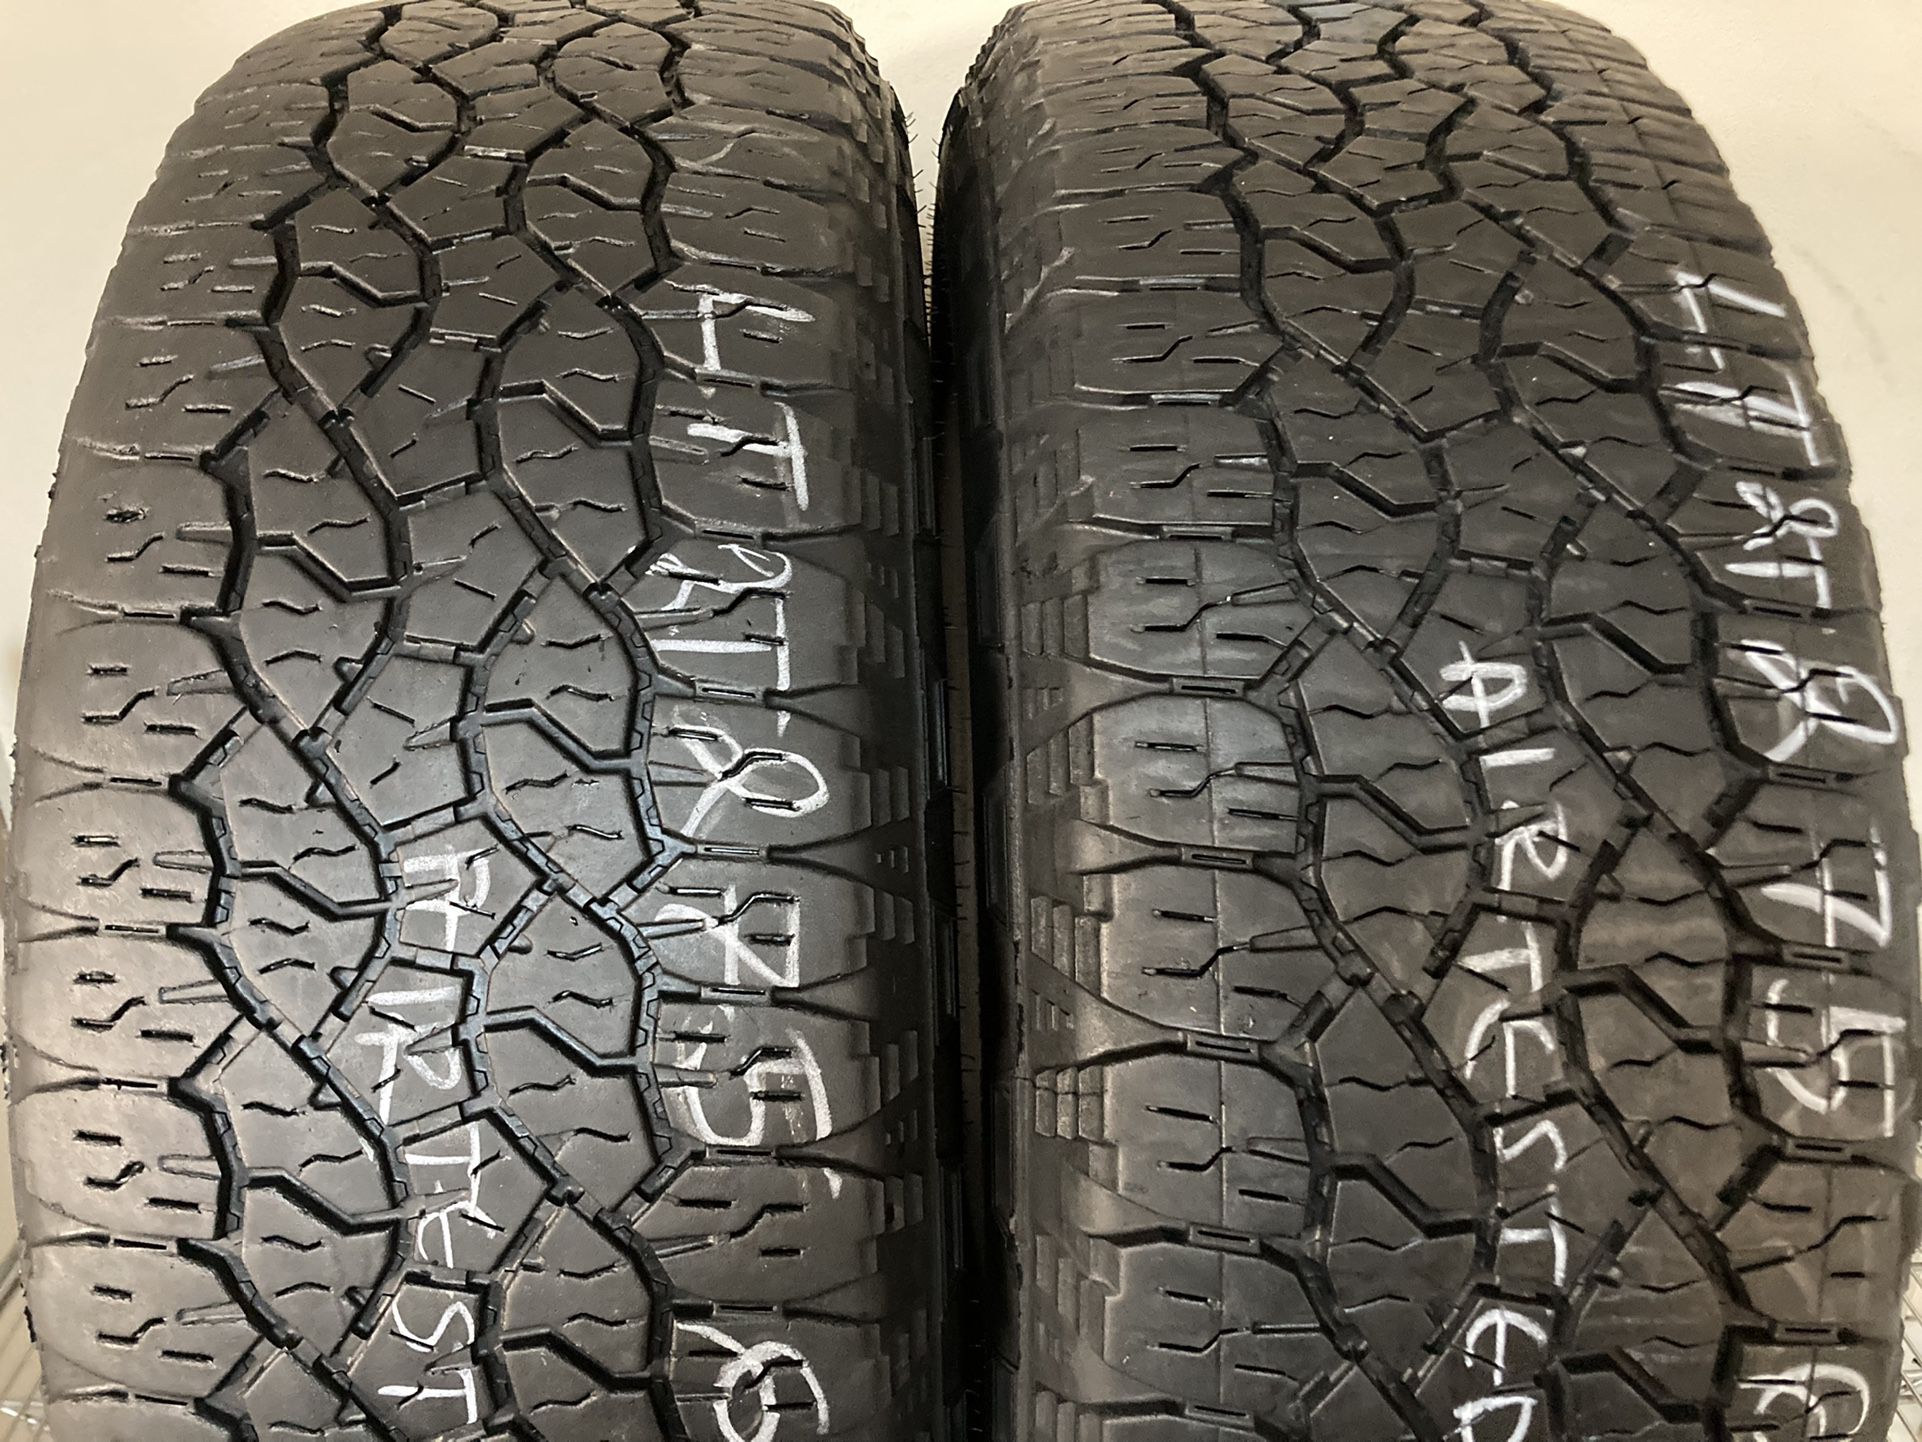 2 Tires LT 275 65 20 Goodyear Wrangler Trailrunner AT High Tread No Repairs  for Sale in Orlando, FL - OfferUp